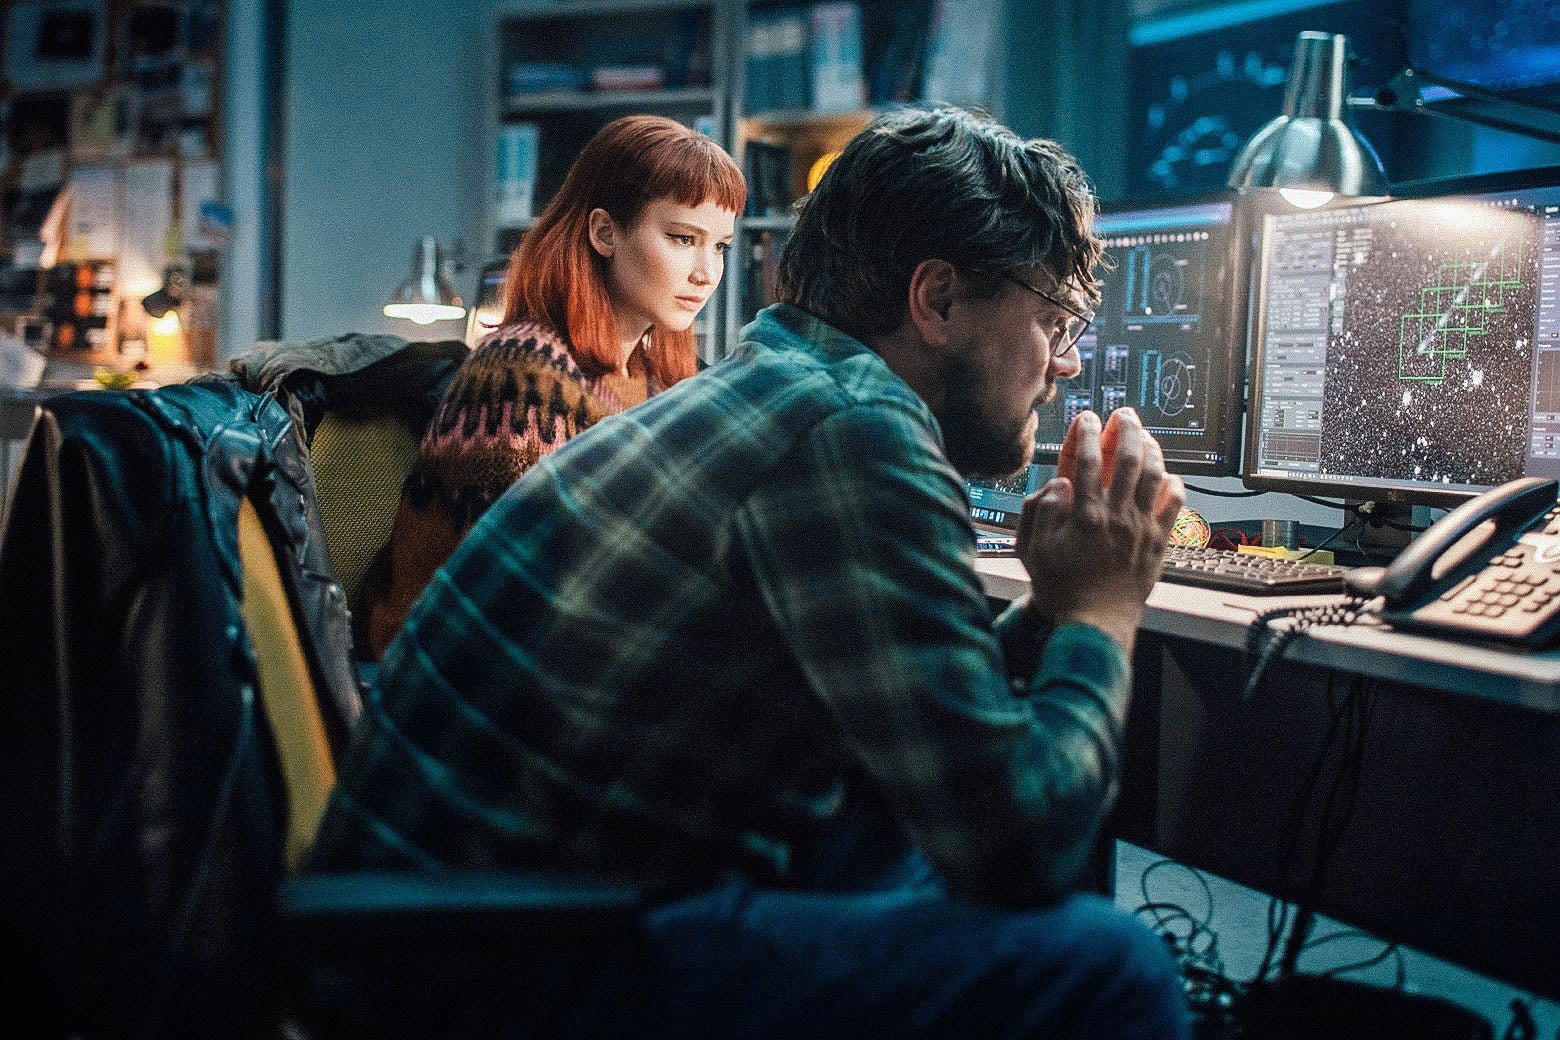 A man and a woman sitting in a dark room looking intently at computer screens showing a comet approaching Earth